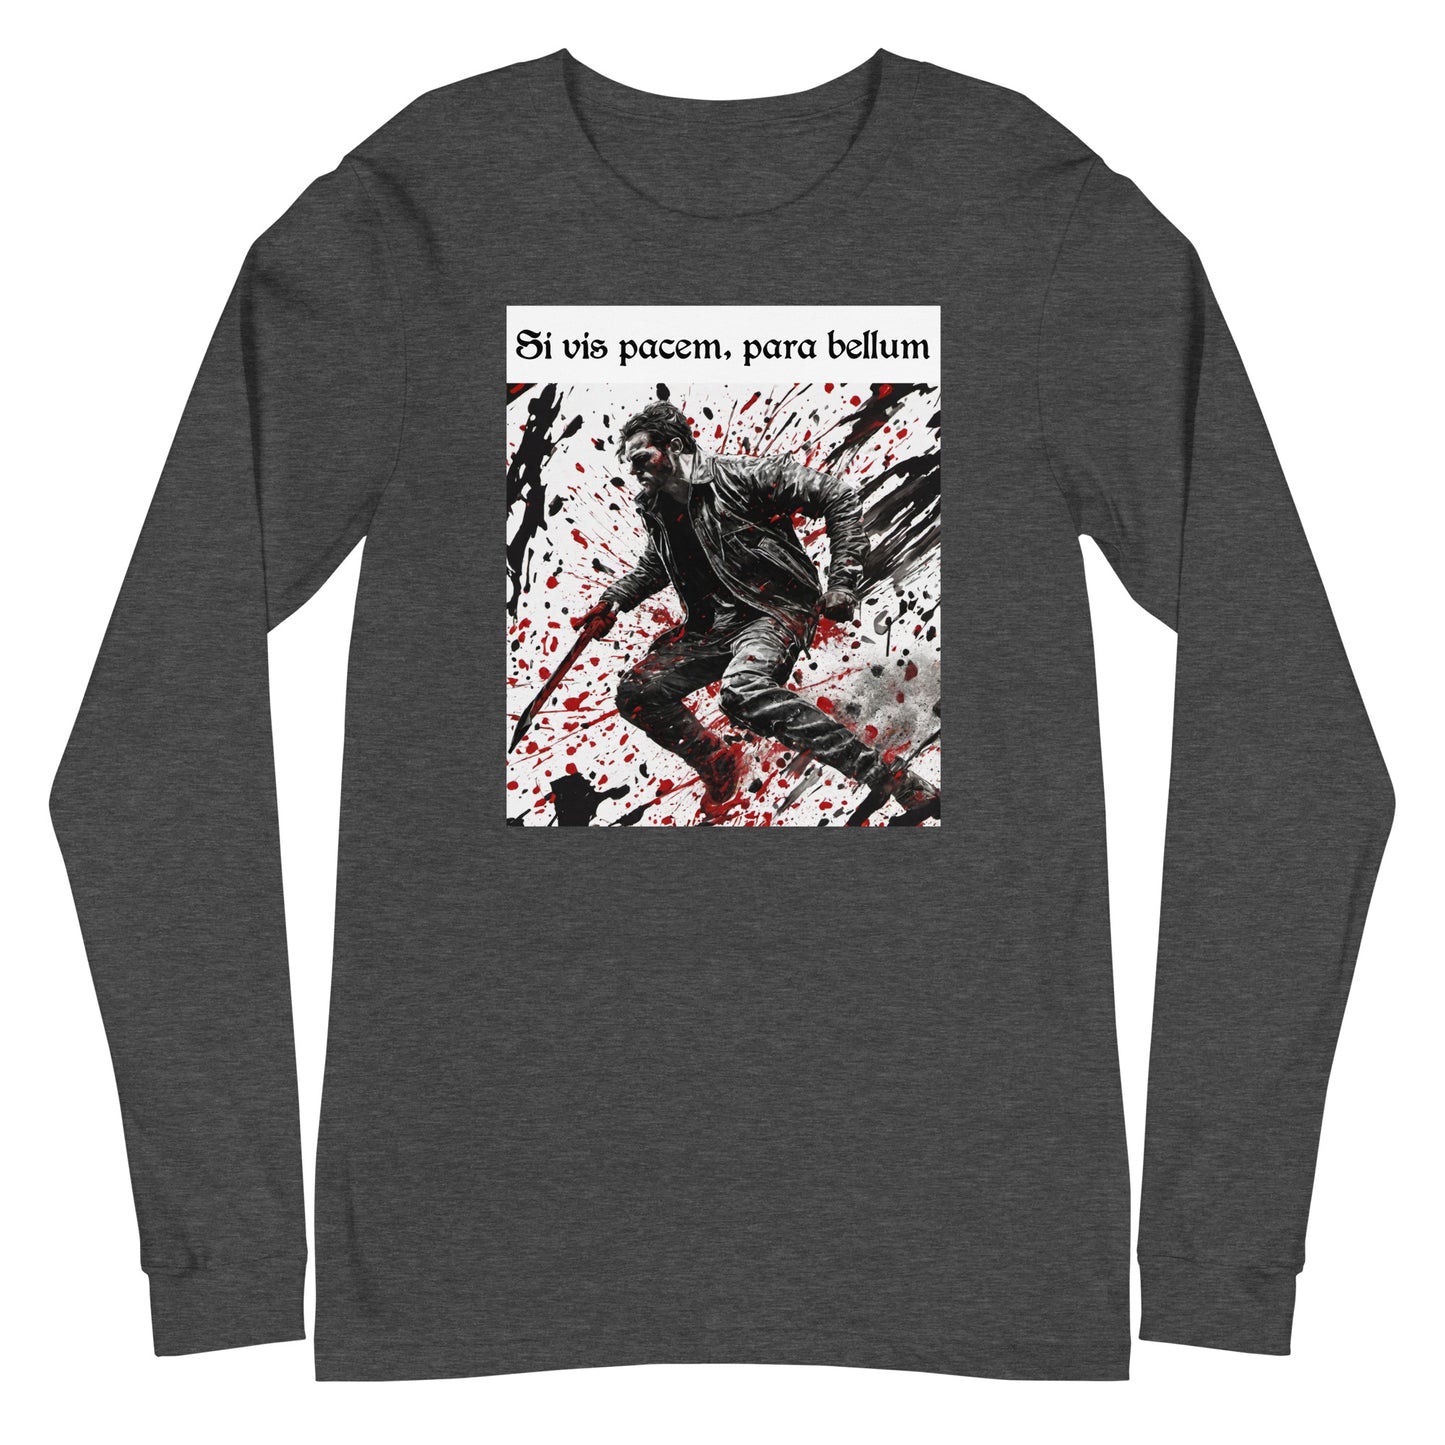 If You Want Peace, Prepare for War Men's Long Sleeve Tee Dark Grey Heather